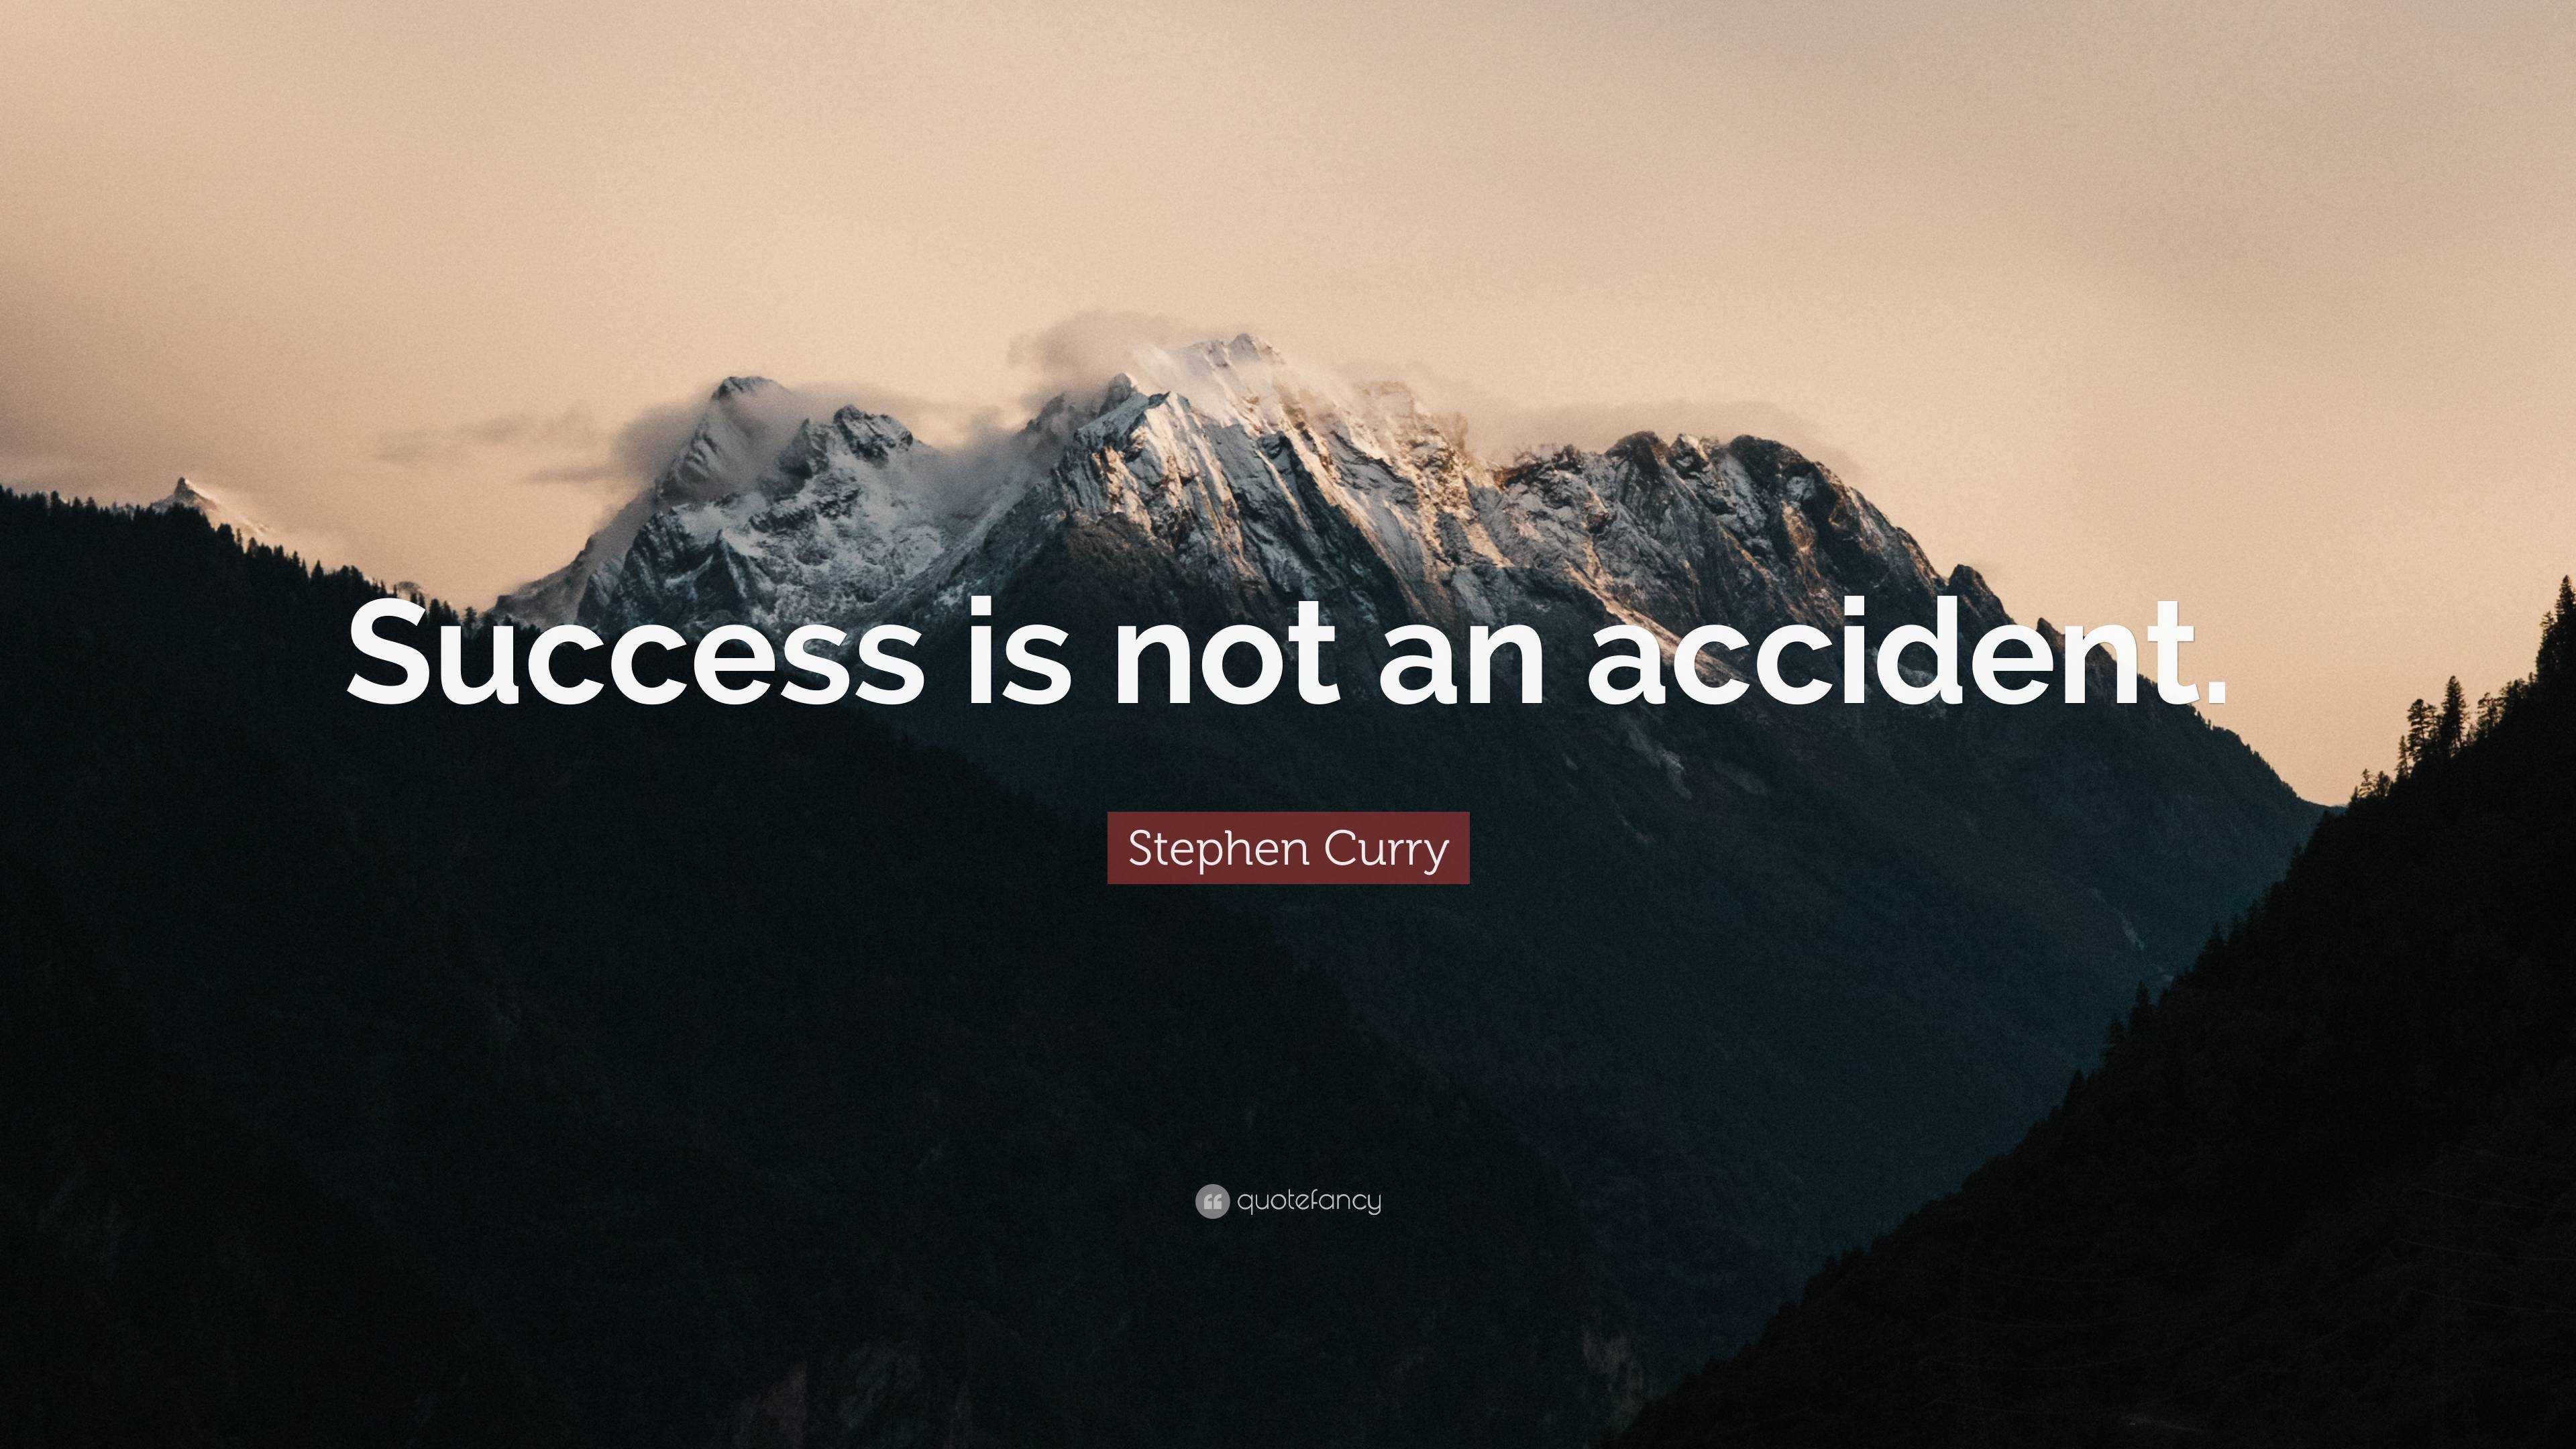 Stephen Curry - Success Is Not an Accident (Original) 